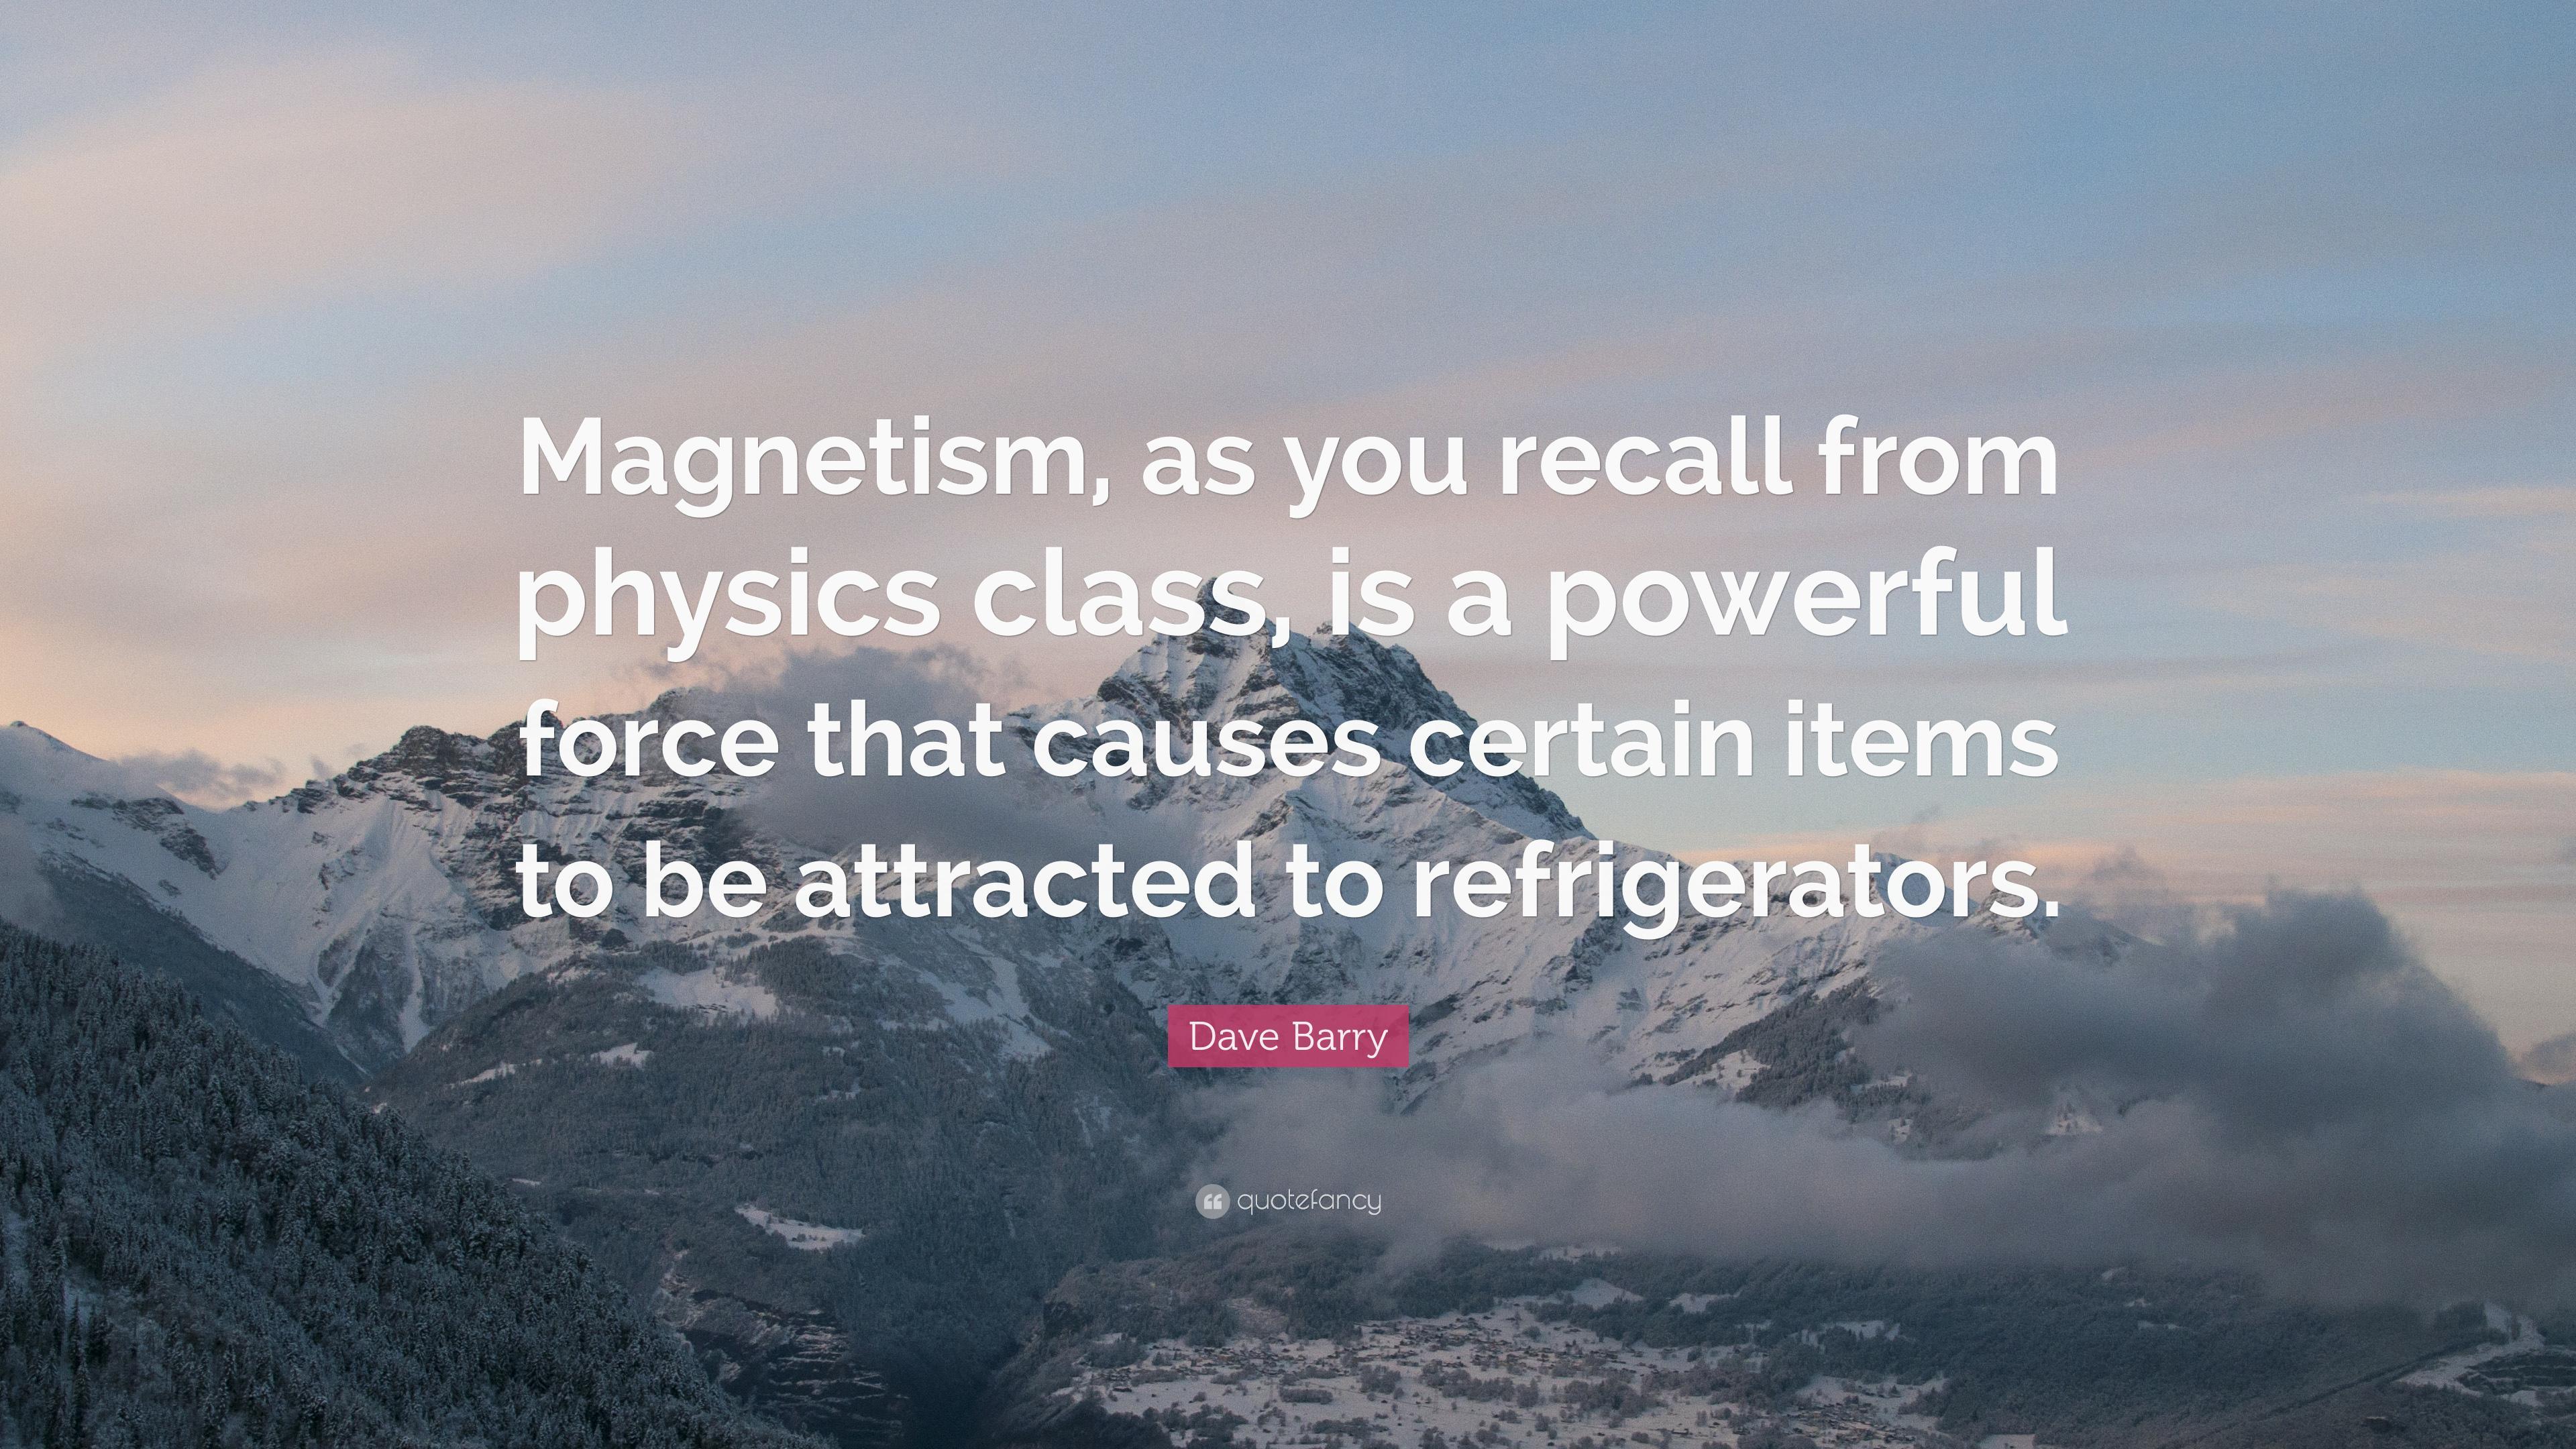 Dave Barry Quote: “Magnetism, as you recall from physics